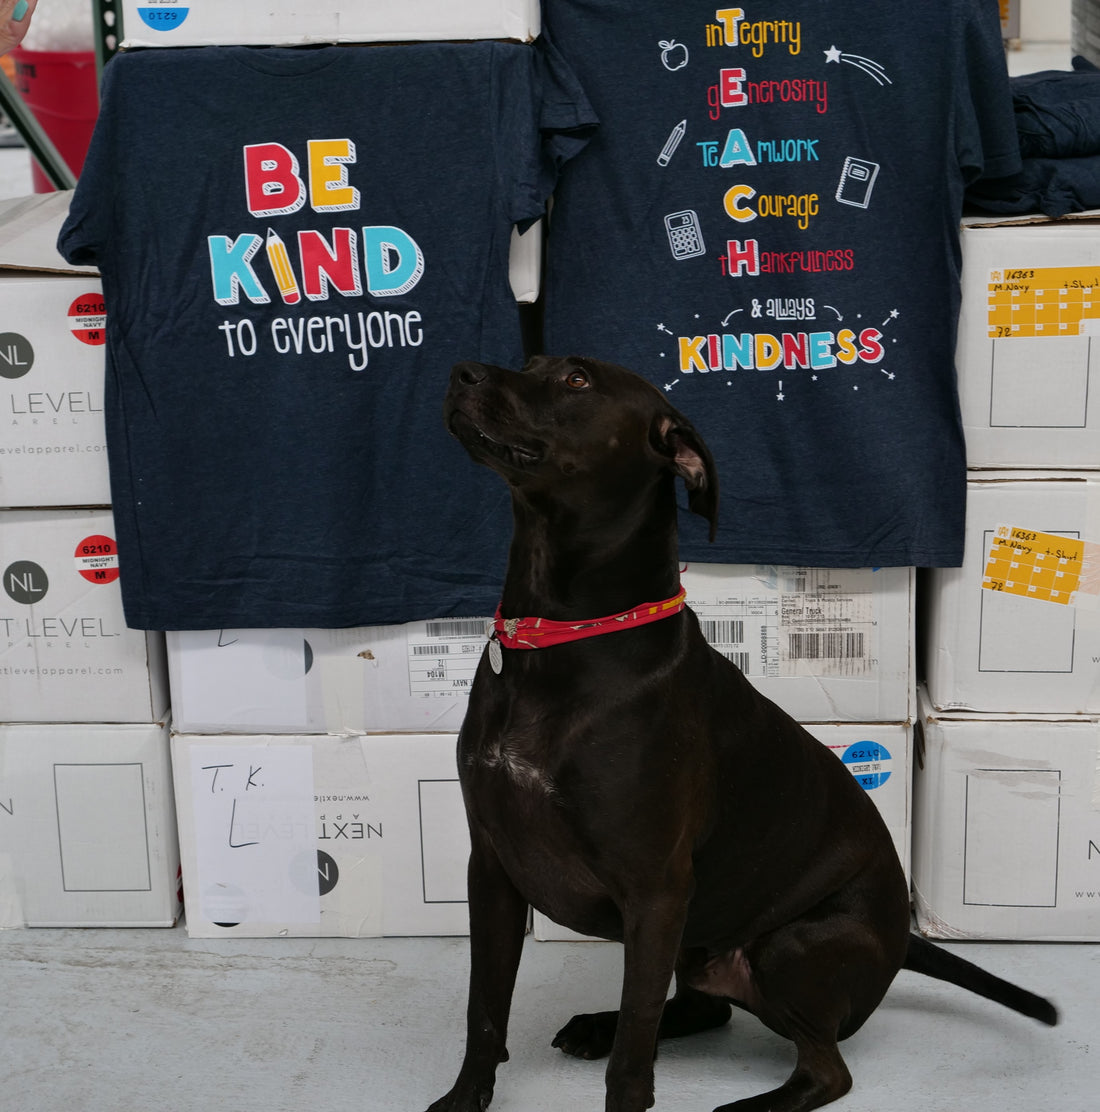 Our dog Max, proudly posing in front of our "T.E.A.C.H. Kindness" Be Kind to Everyone® short-sleeve tee.